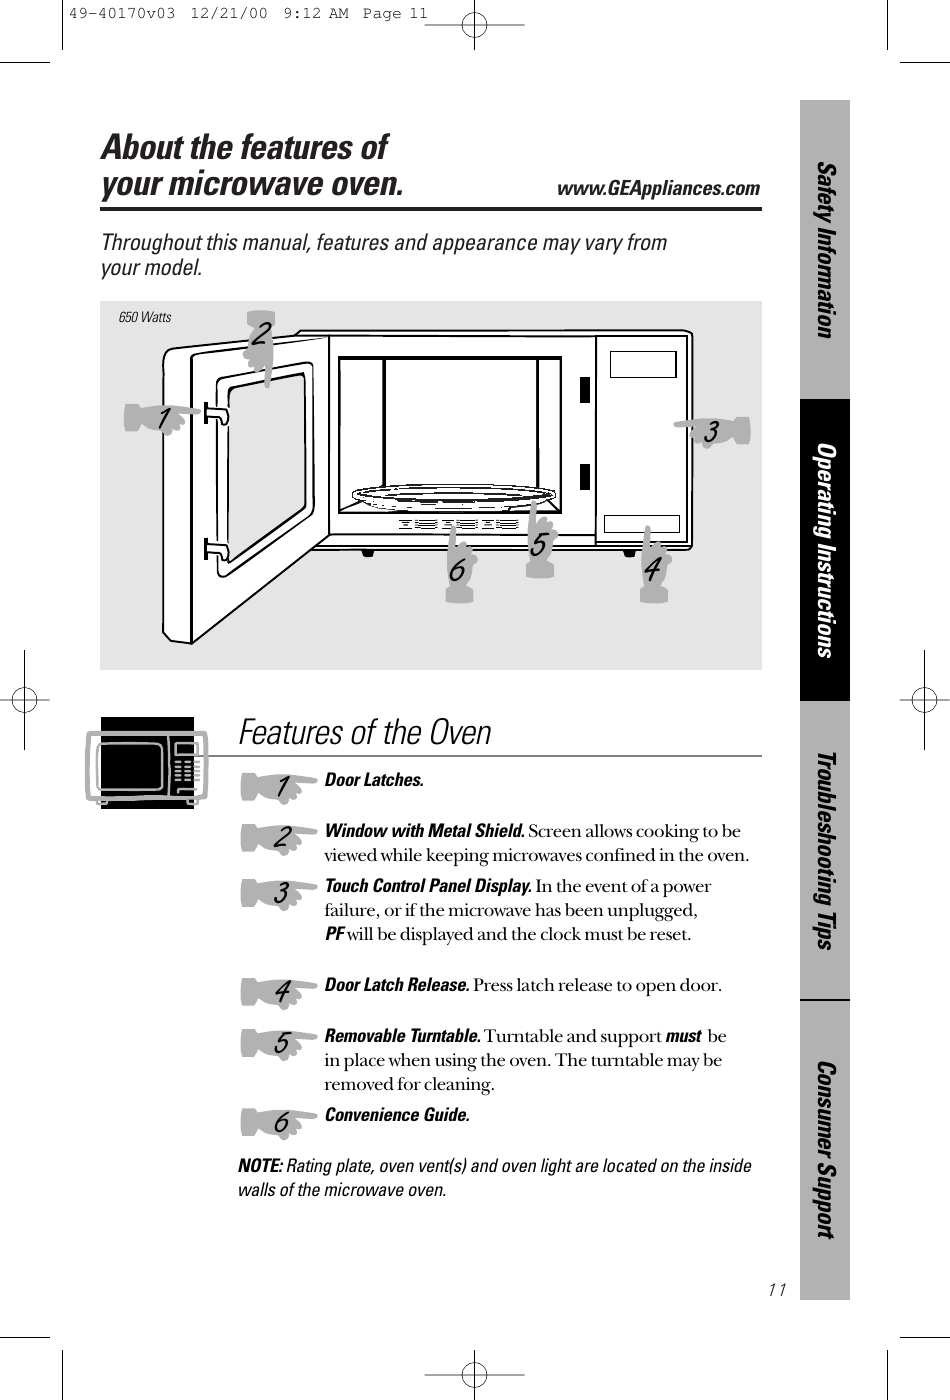 11About the features of your microwave oven.www.GEAppliances.com Throughout this manual, features and appearance may vary from your model.650 WattsFeatures of the OvenDoor Latches.Window with Metal Shield. Screen allows cooking to beviewed while keeping microwaves confined in the oven.Touch Control Panel Display. In the event of a powerfailure, or if the microwave has been unplugged, PFwill be displayed and the clock must be reset.Door Latch Release. Press latch release to open door.Removable Turntable.Turntable and support mustbe in place when using the oven. The turntable may beremoved for cleaning.Convenience Guide.NOTE: Rating plate, oven vent(s) and oven light are located on the insidewalls of the microwave oven.132465123456Consumer SupportTroubleshooting TipsOperating InstructionsSafety Information49-40170v03  12/21/00  9:12 AM  Page 11